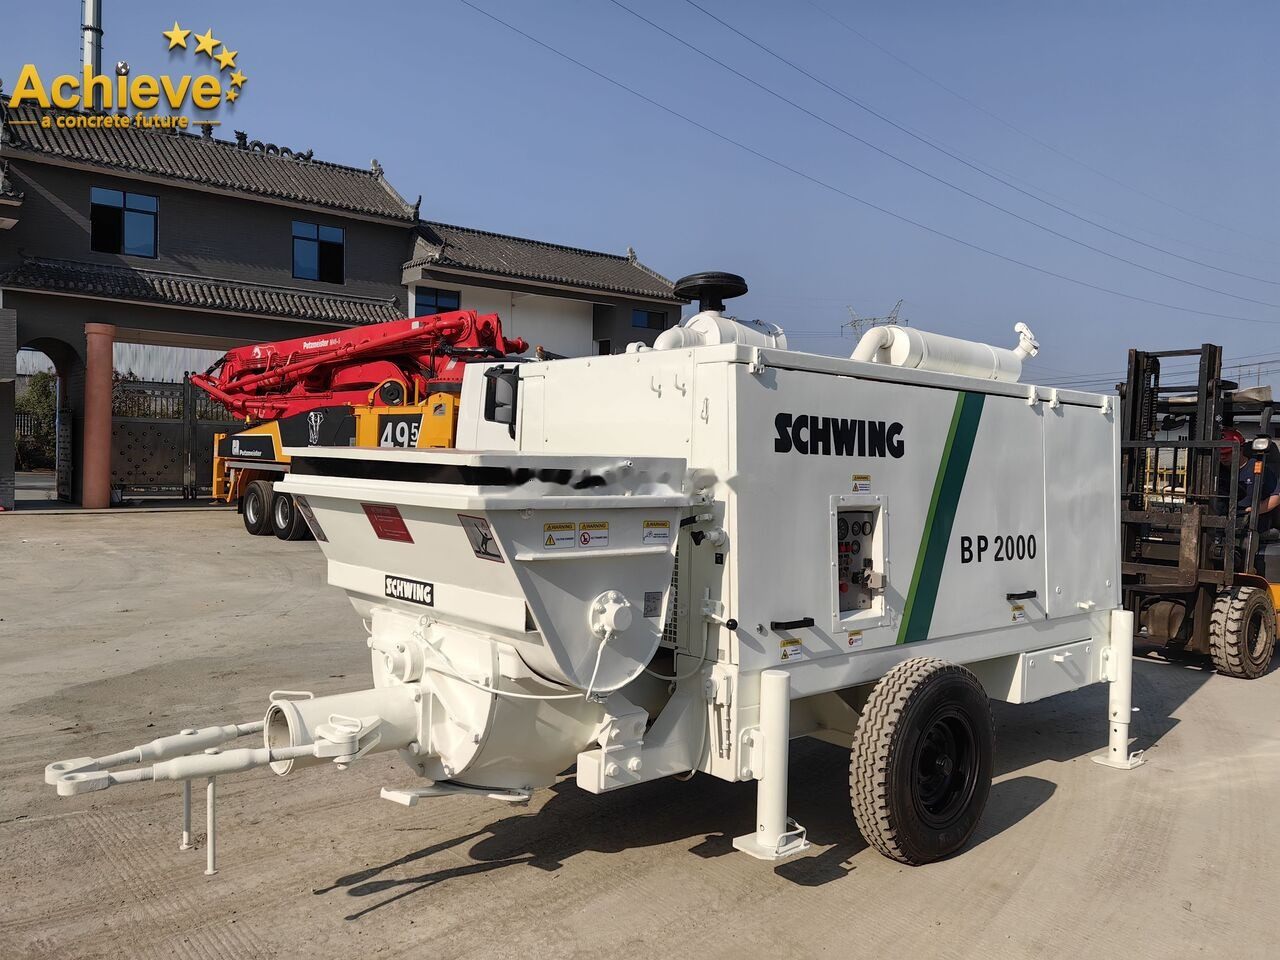 New Stationary concrete pump Schwing 【ACHIEVE】TOP CONDITION!!! Schwing Concrete Pump With Brand New H: picture 8